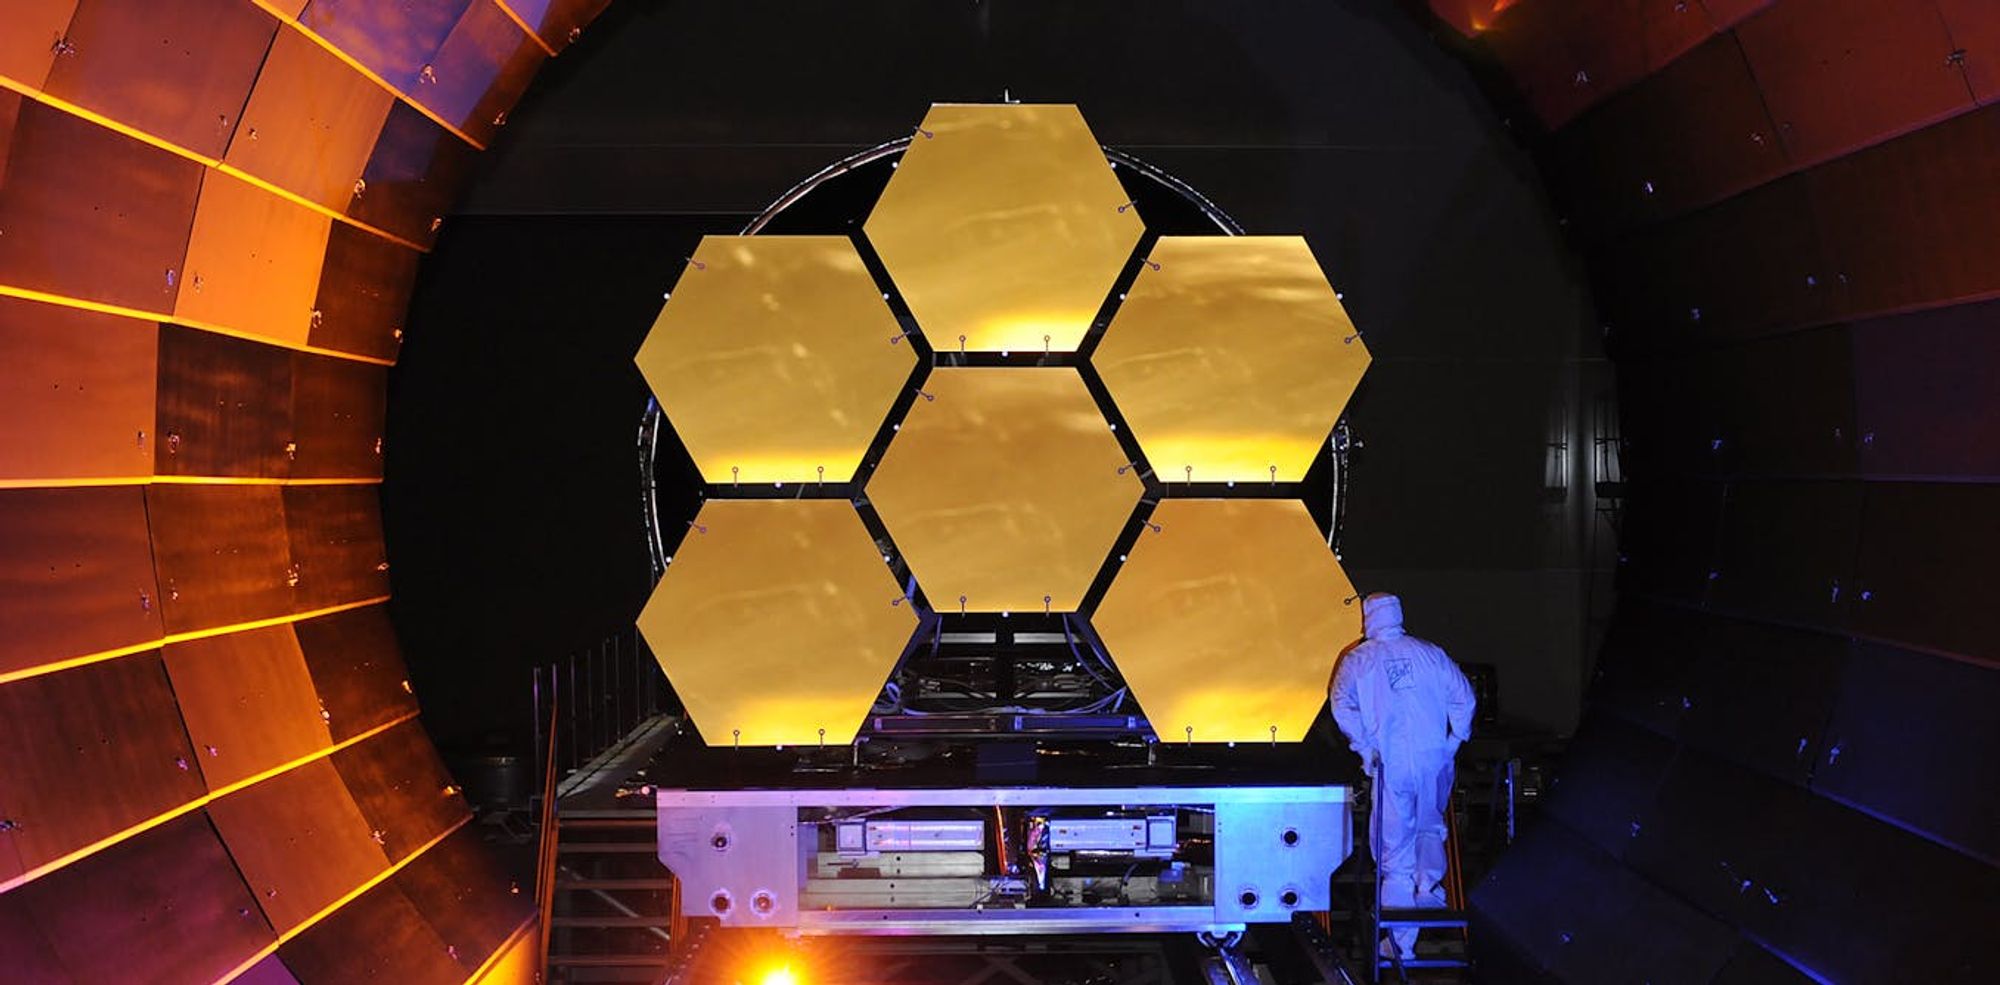 James Webb telescope: how it could uncover some of the universe's best-kept secrets